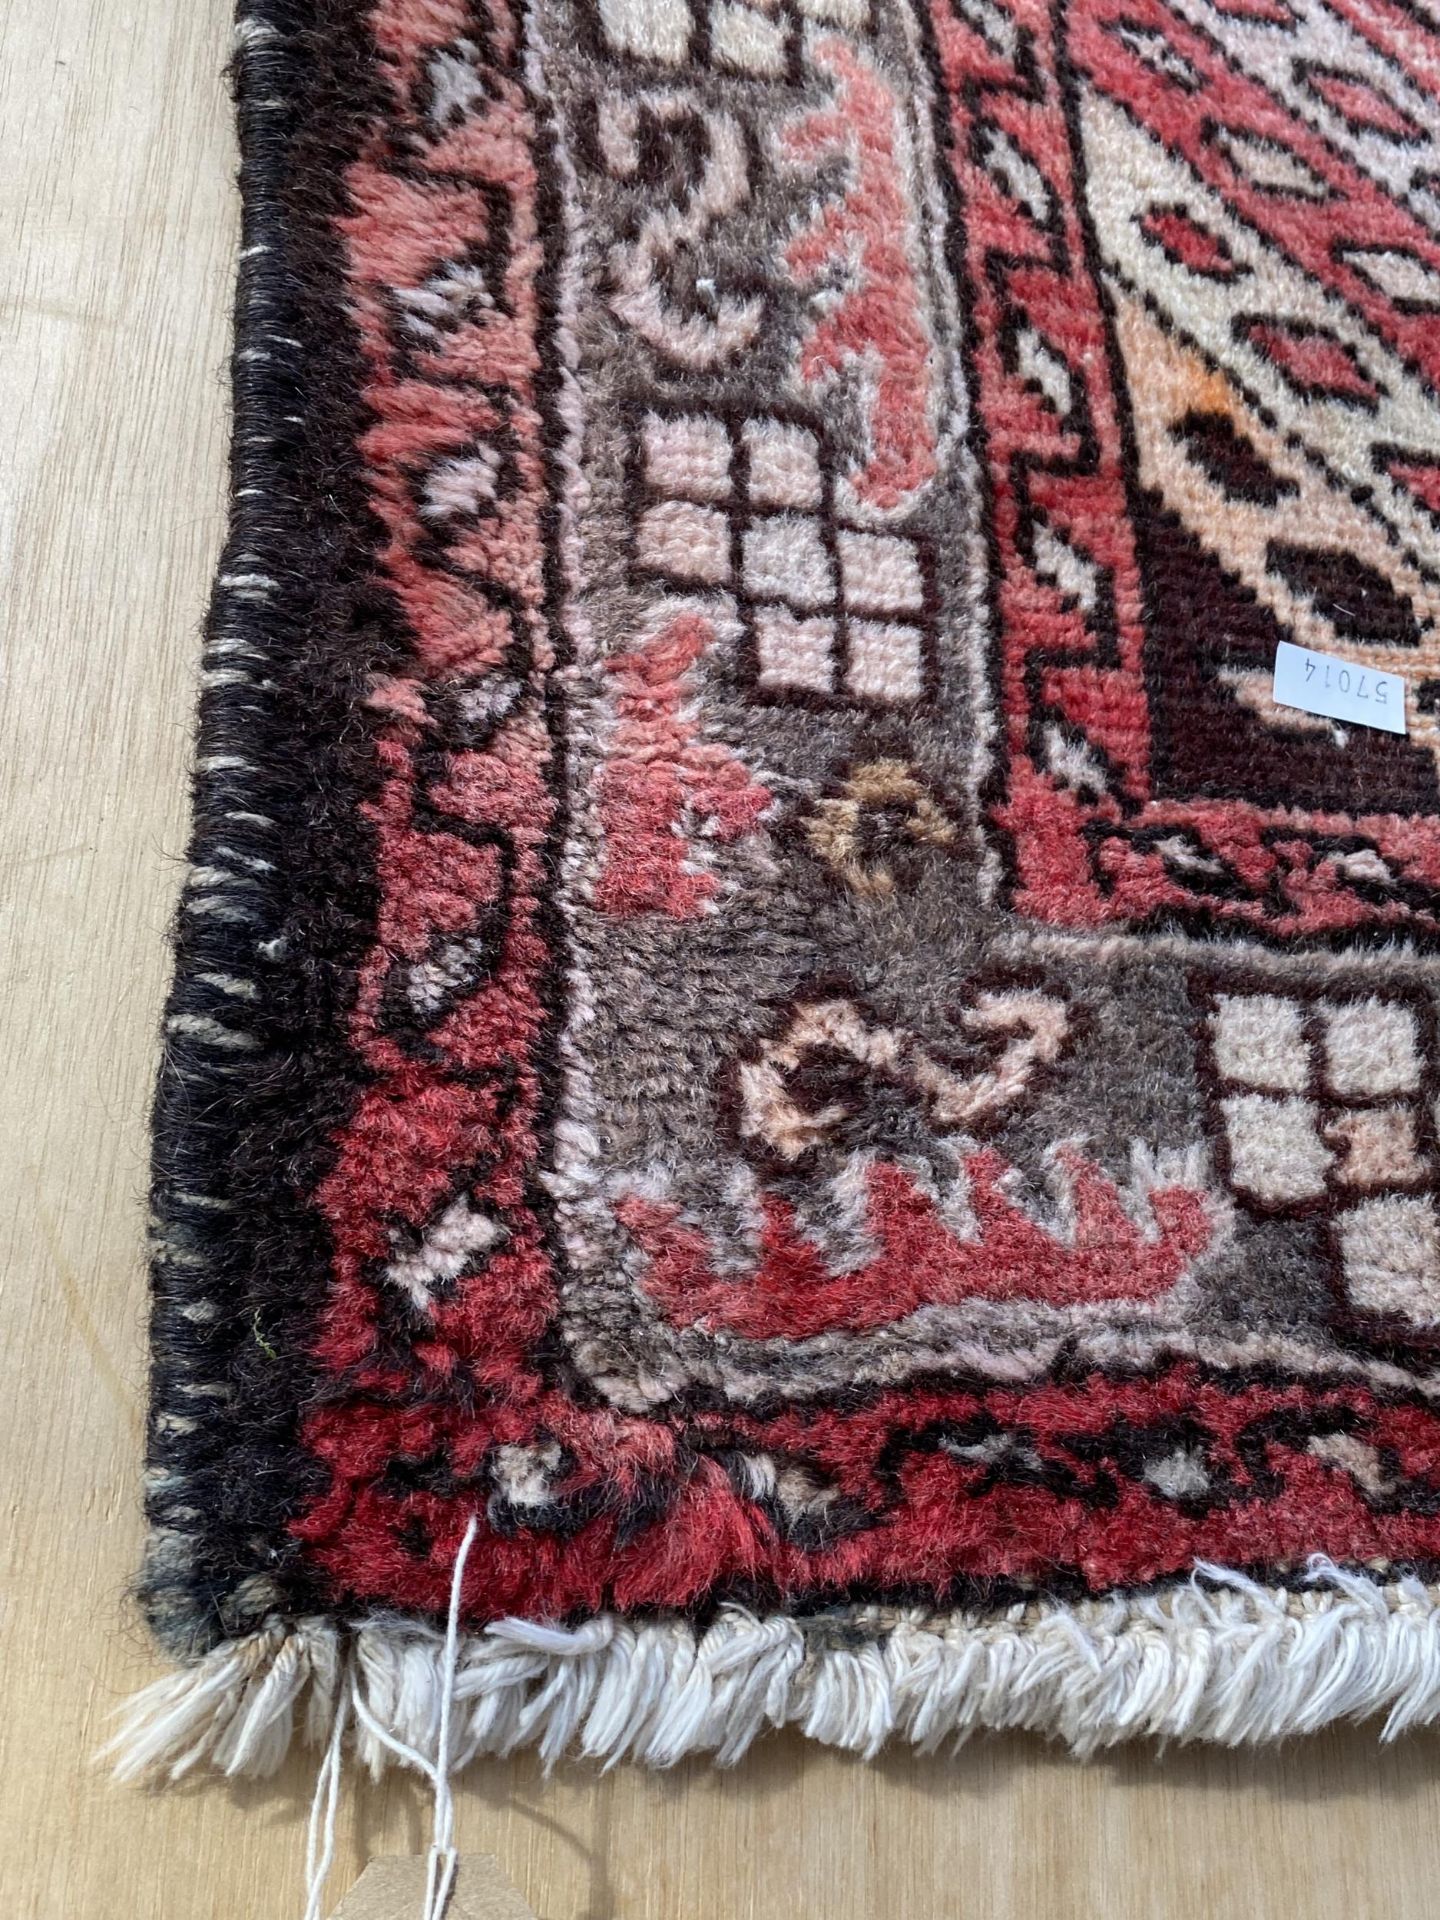 A RED PATTERNED FRINGED RUG - Image 2 of 2